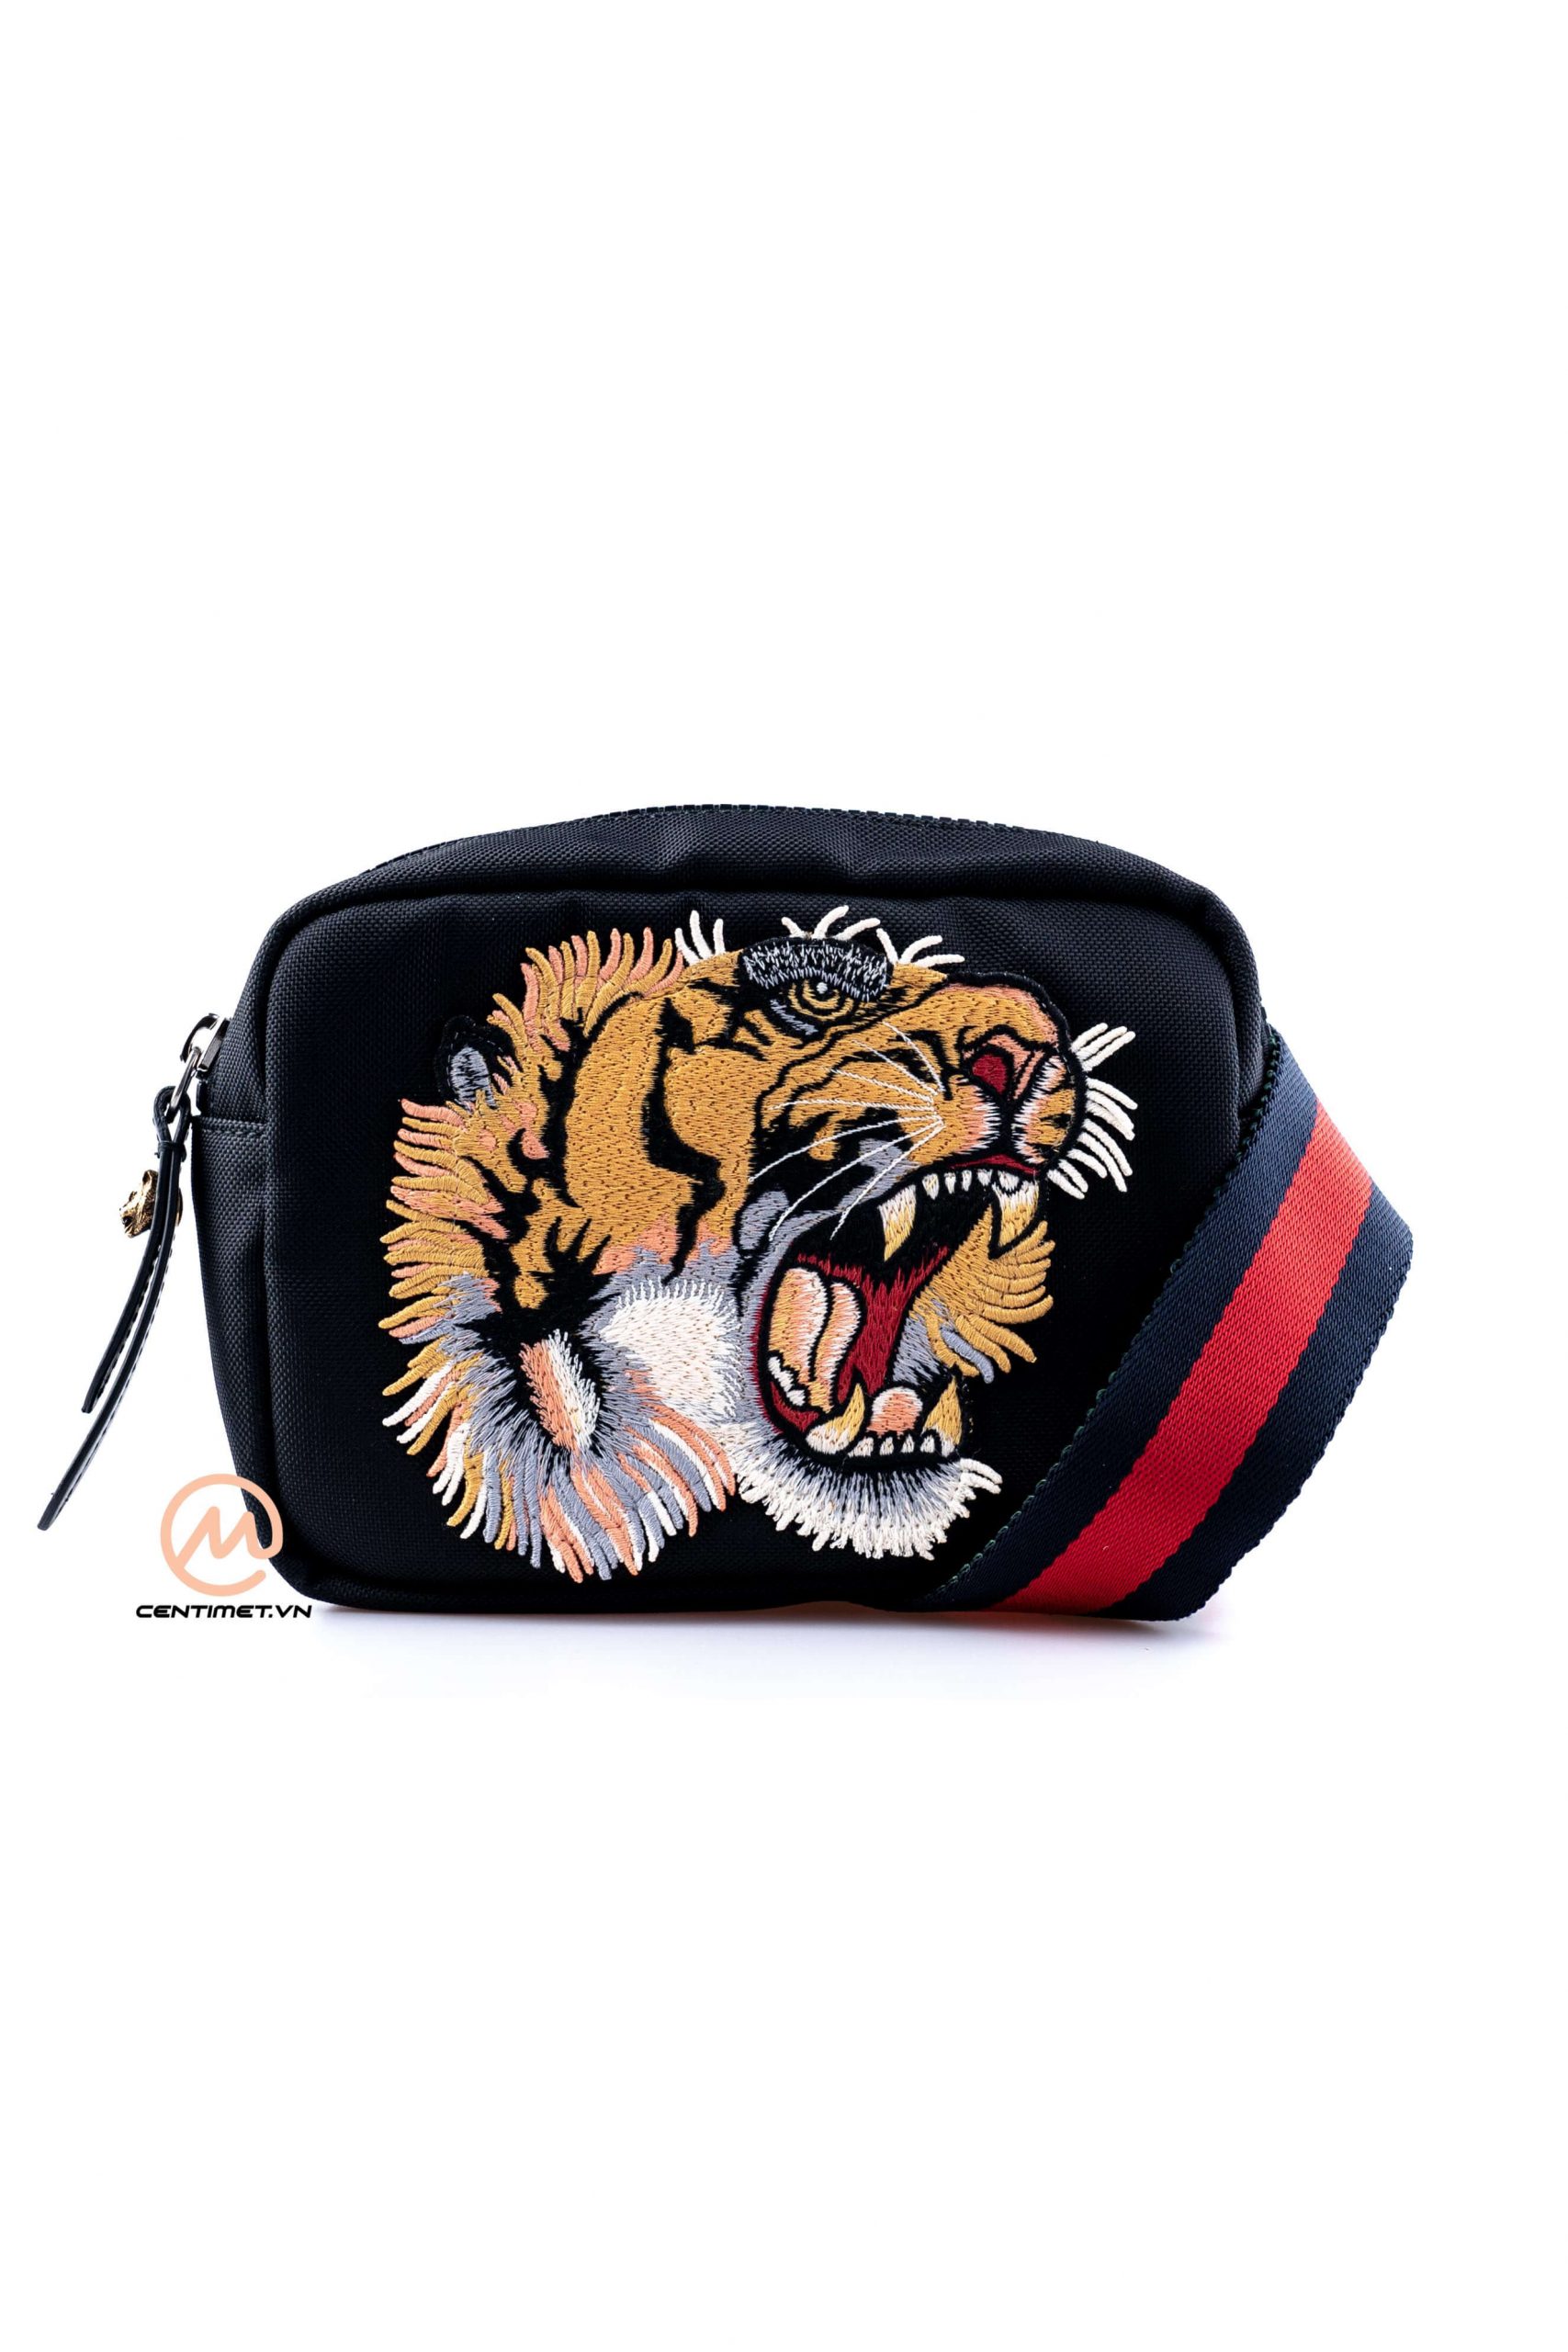 tui-gucci-black-tiger-embroidered-cross-body-bag-0012 (2 of 6)